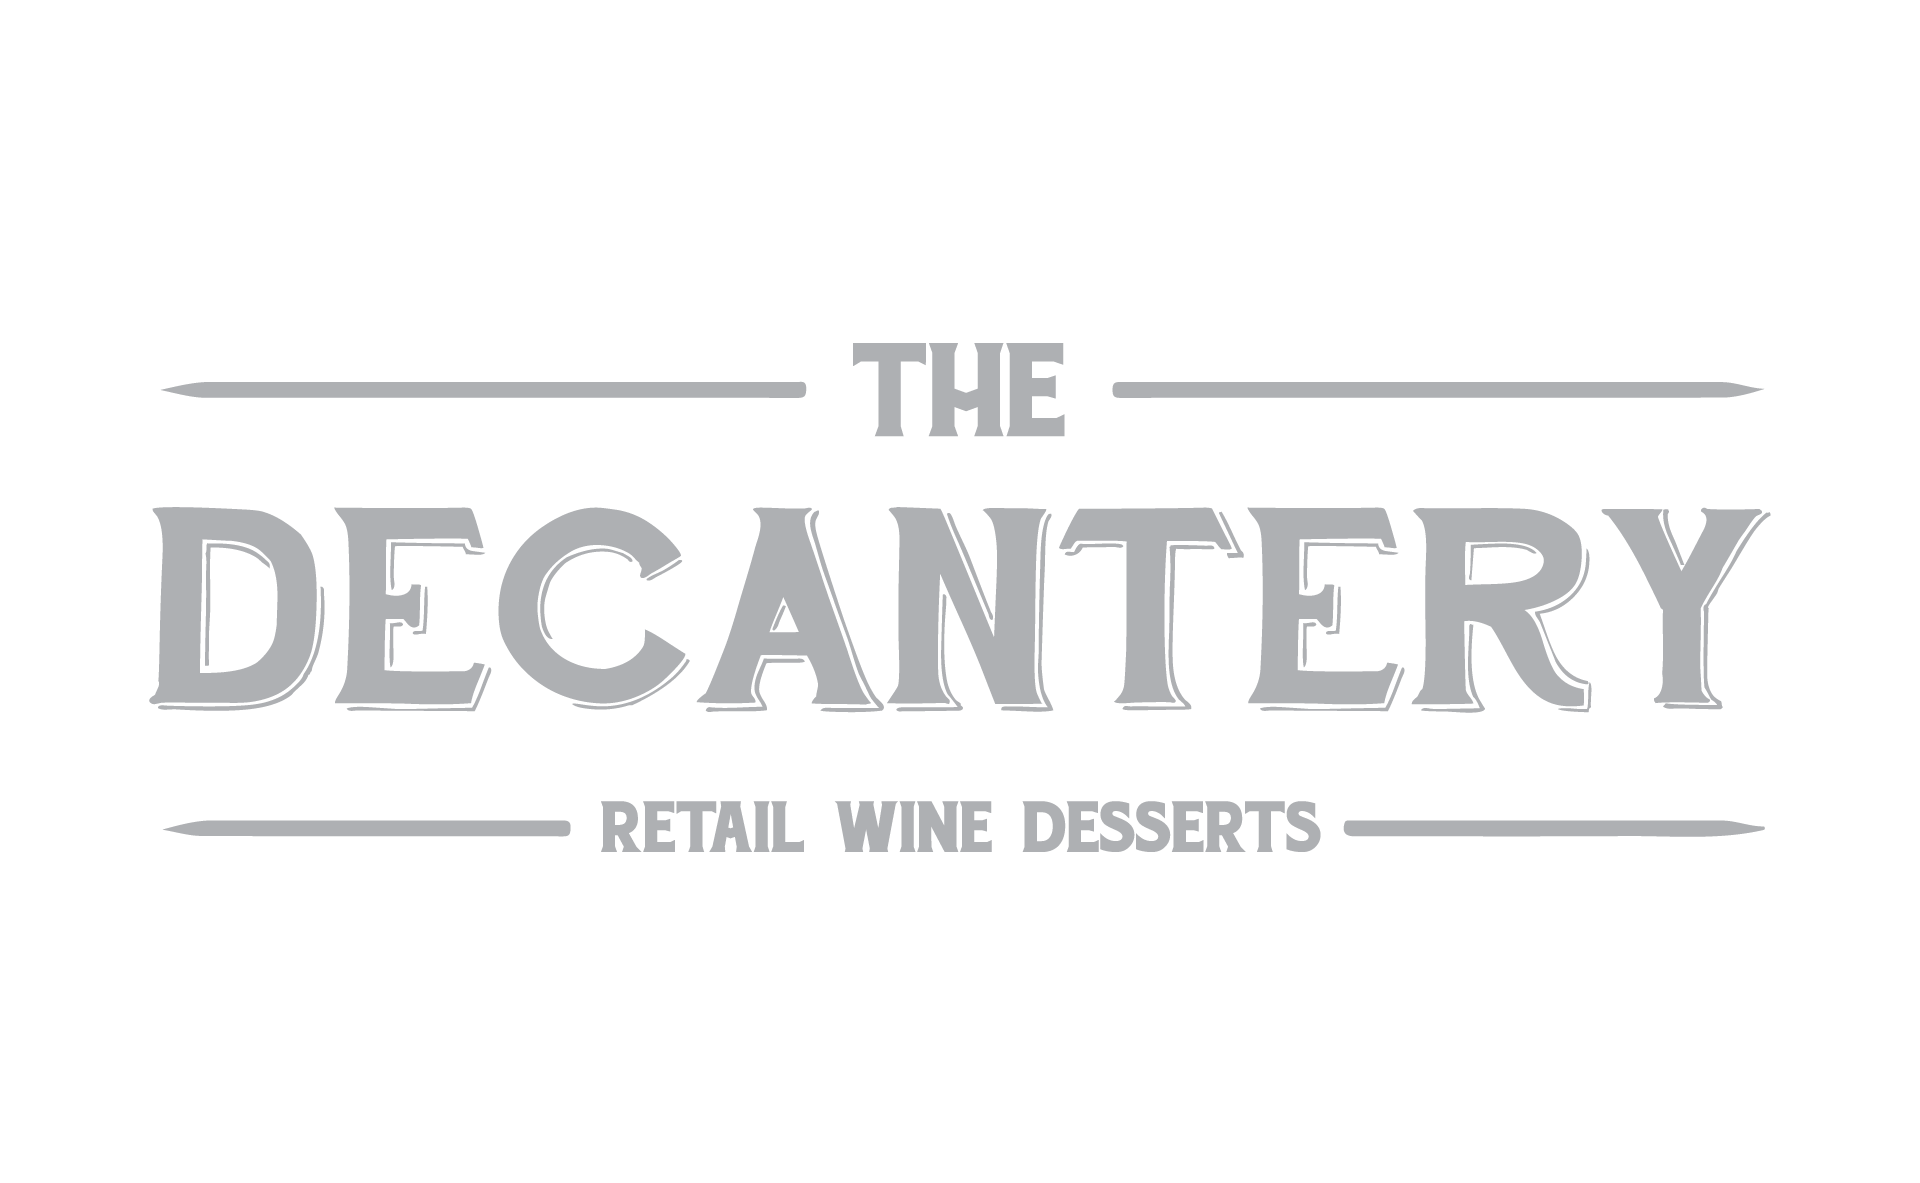 The Decantery restaurant logo in gray